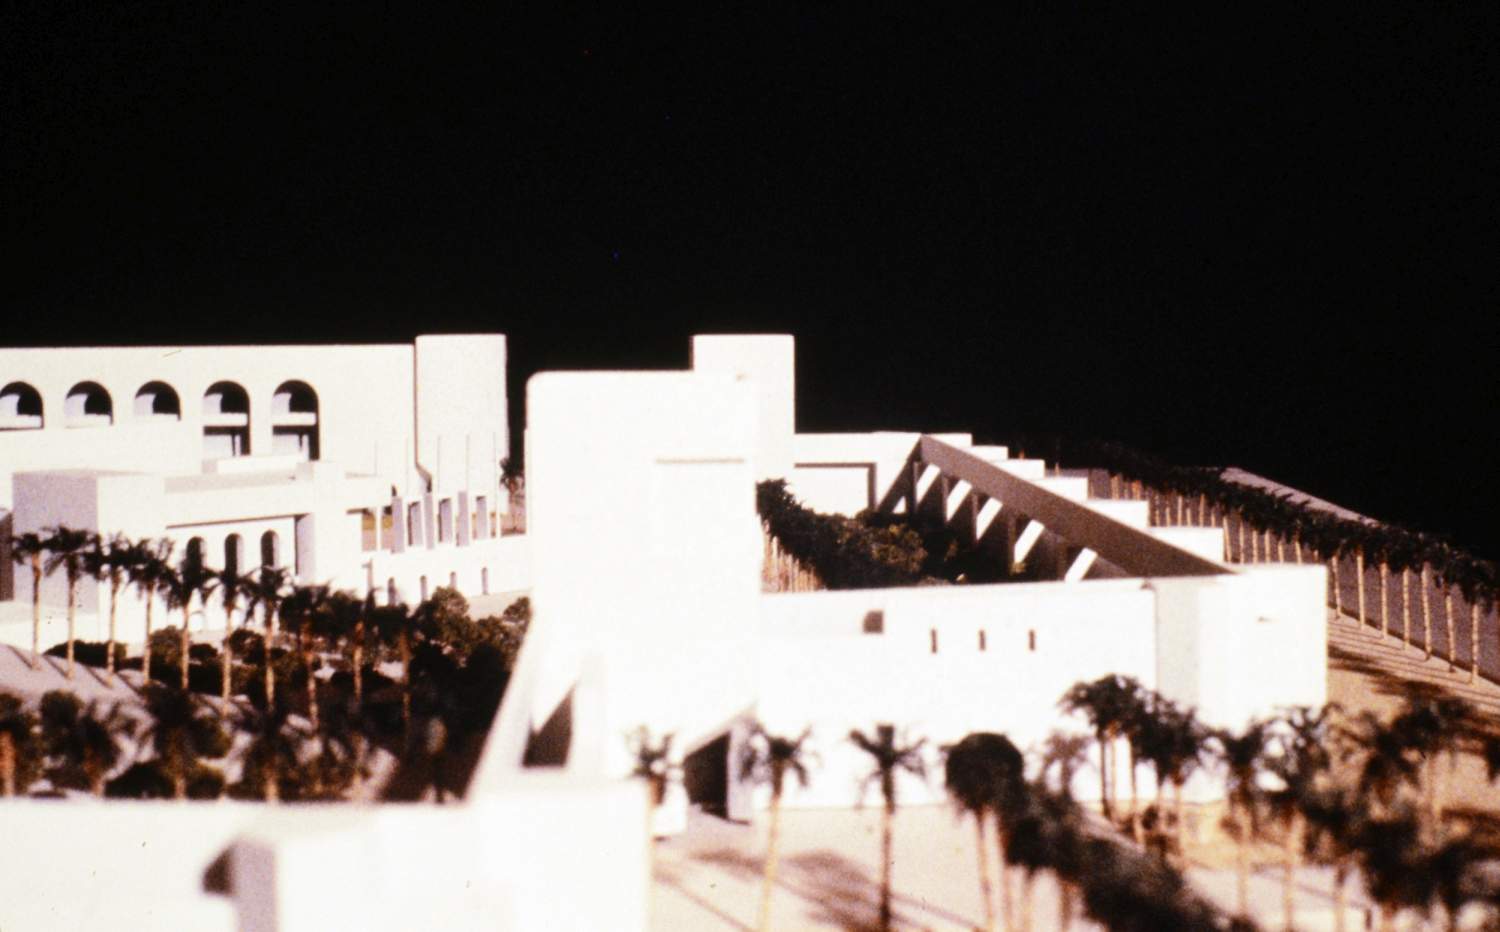 <p>View of model, showing exterior area with palm trees.</p>